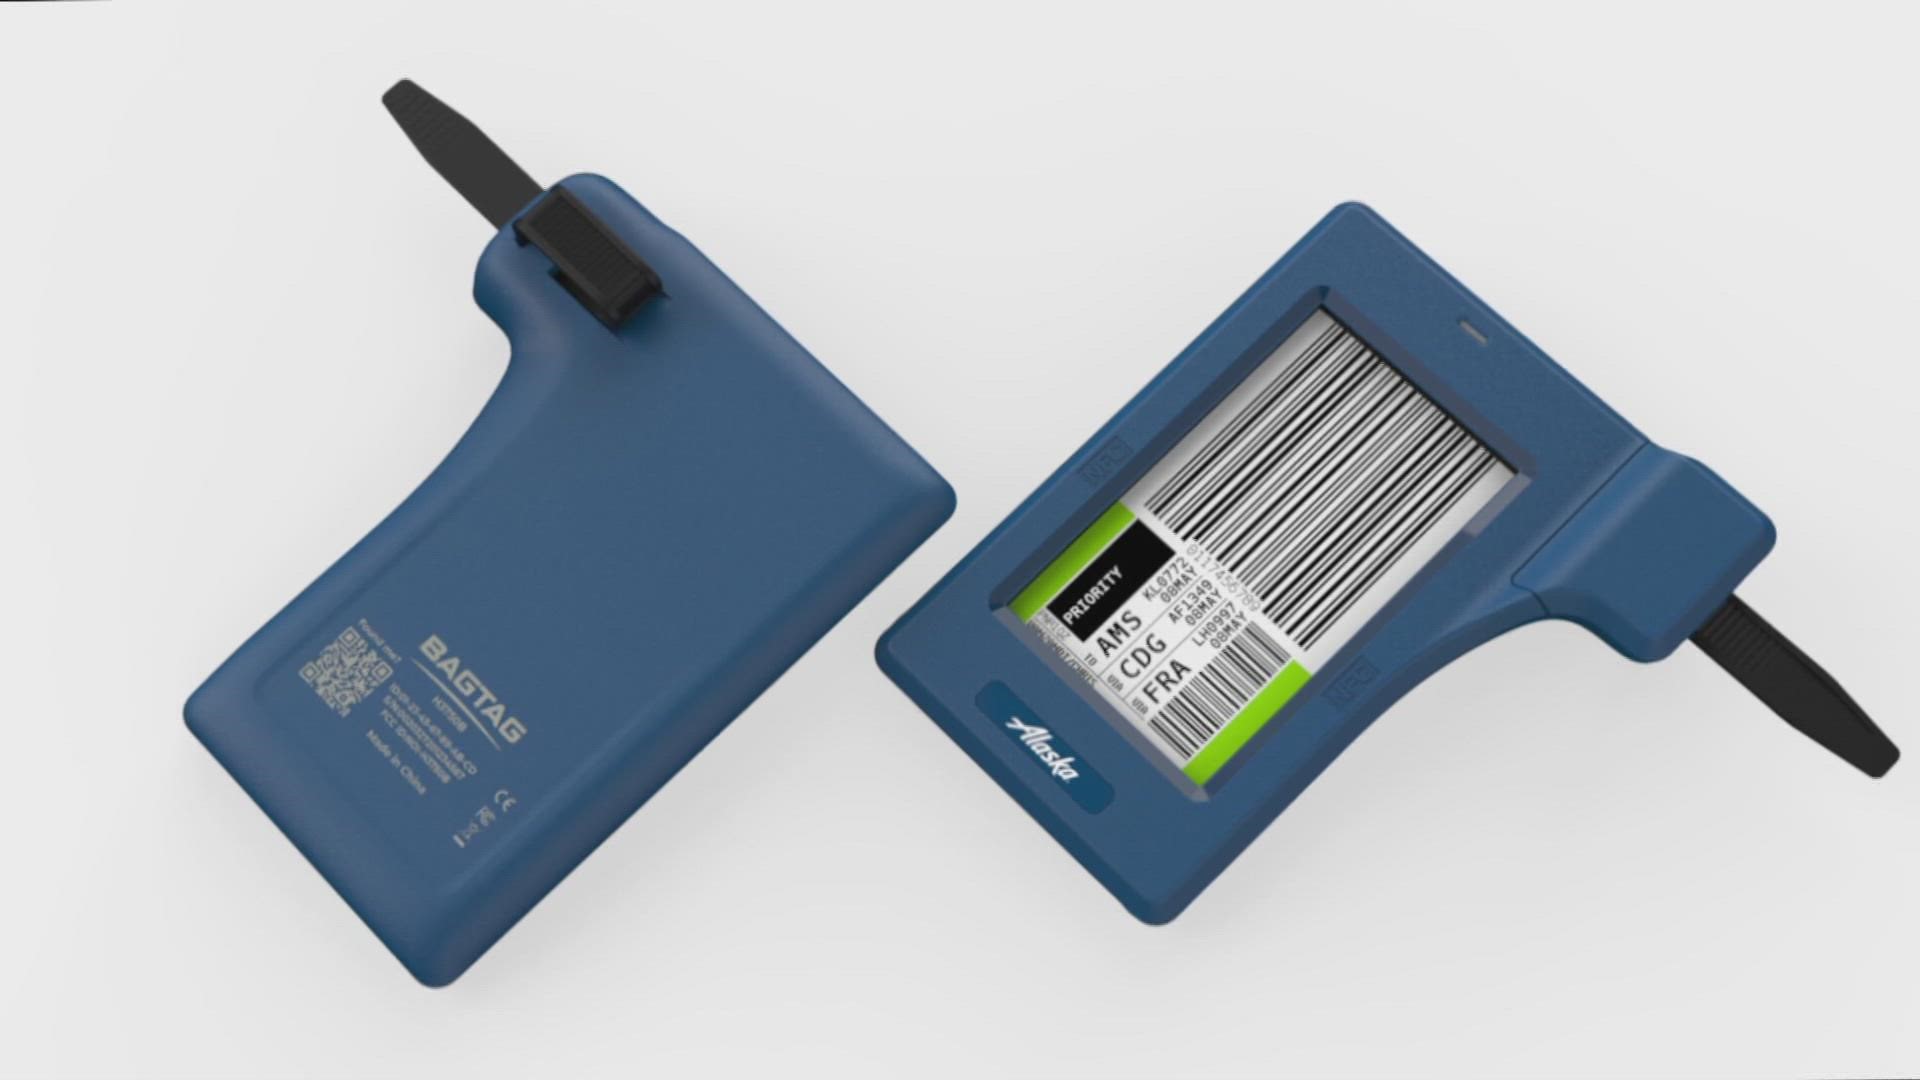 Alaska Airlines said it is the first airline in the U.S. to roll out electronic luggage tags, replacing paper tags.